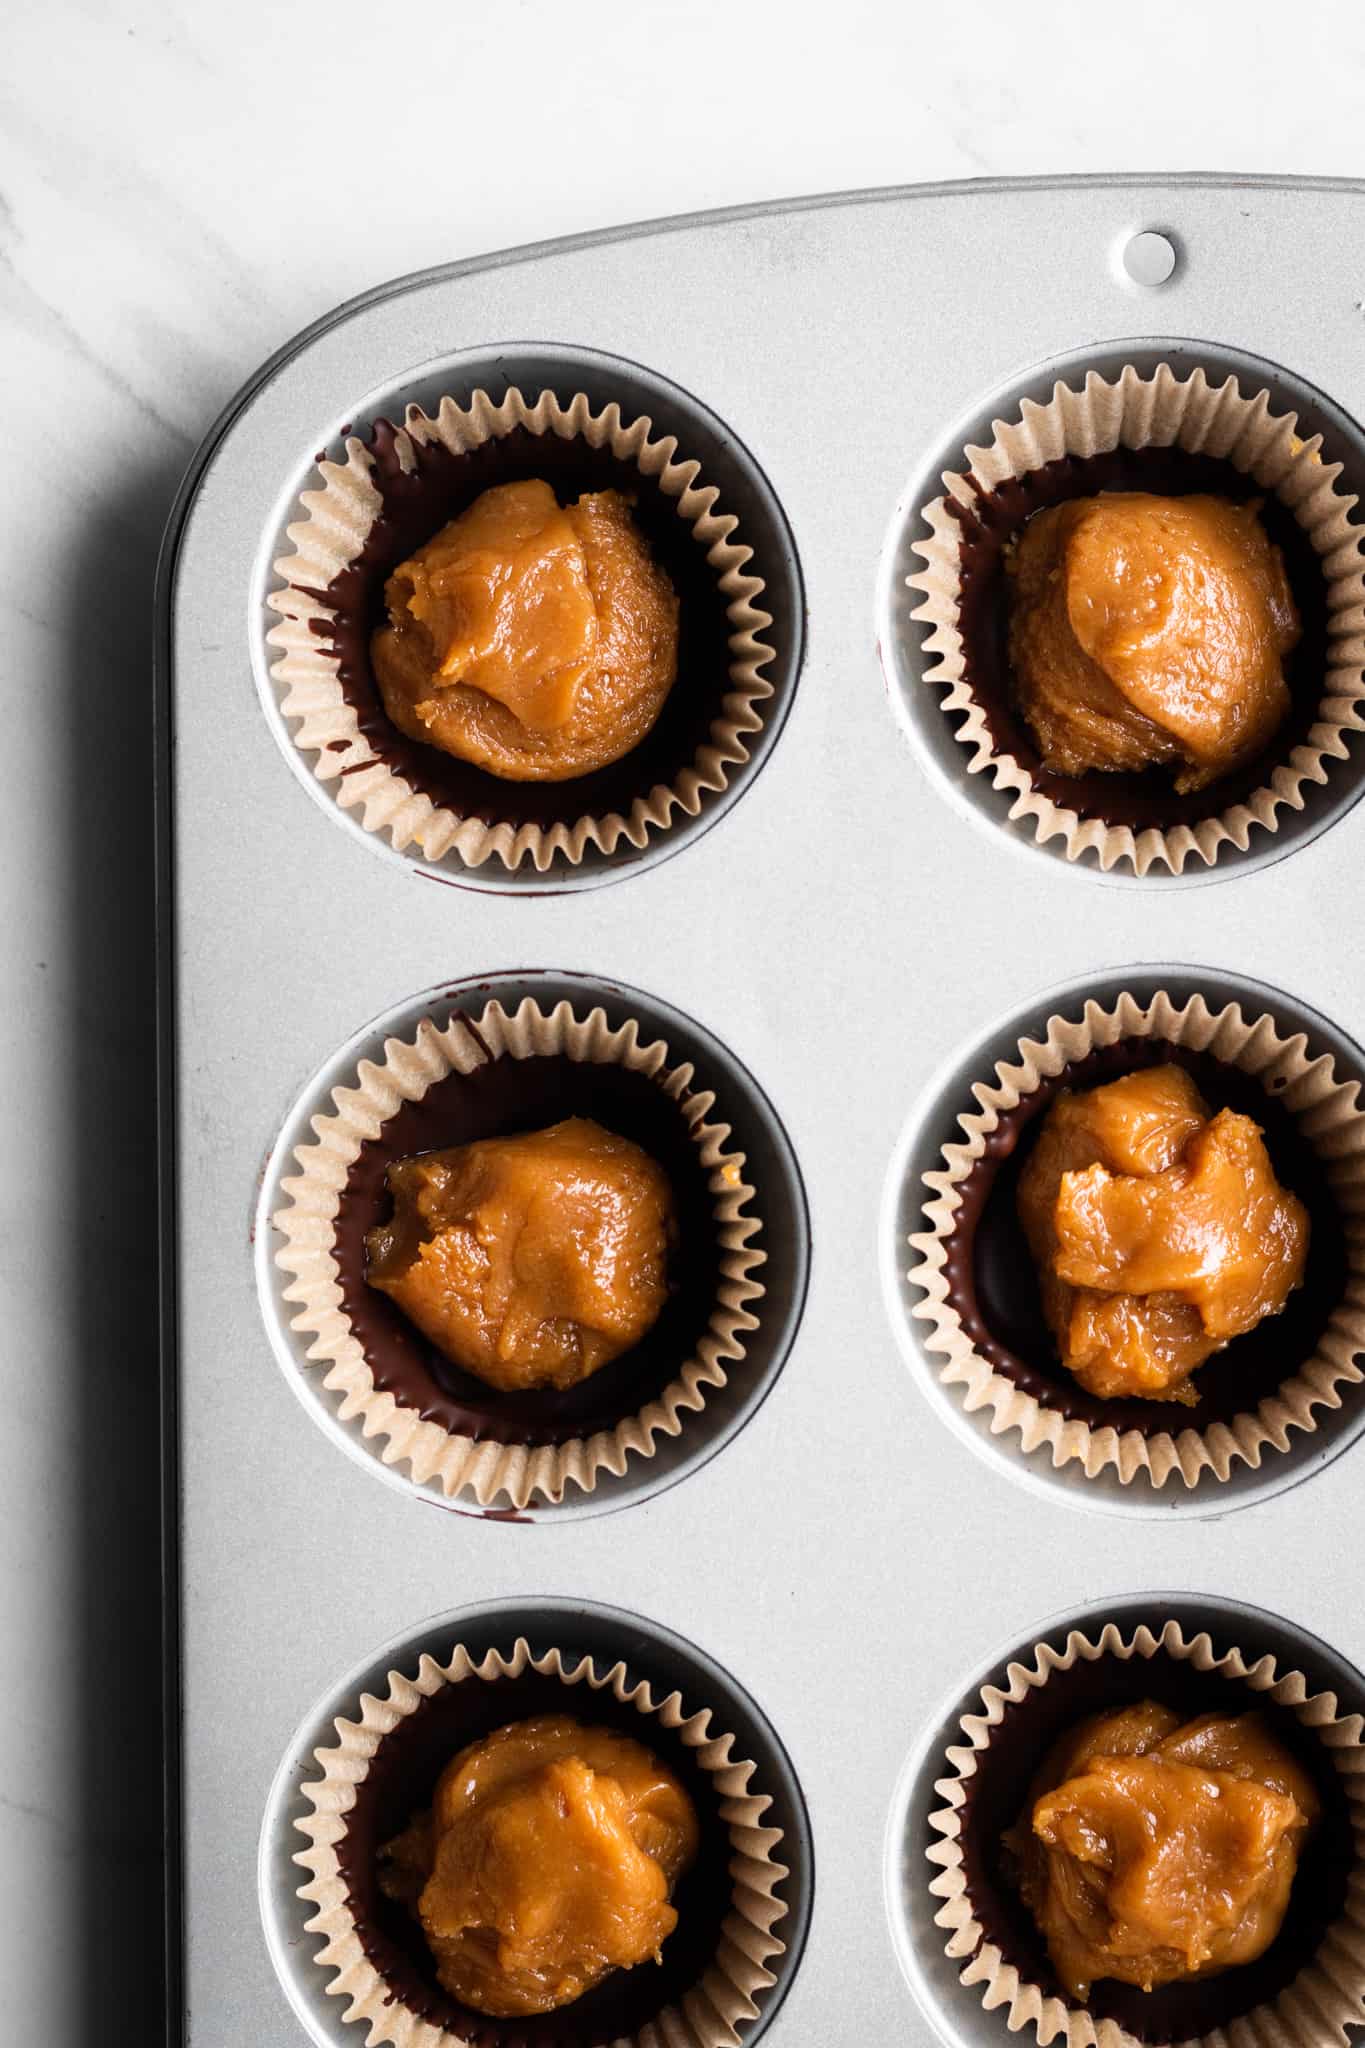 caramel in chocolate cups from the top